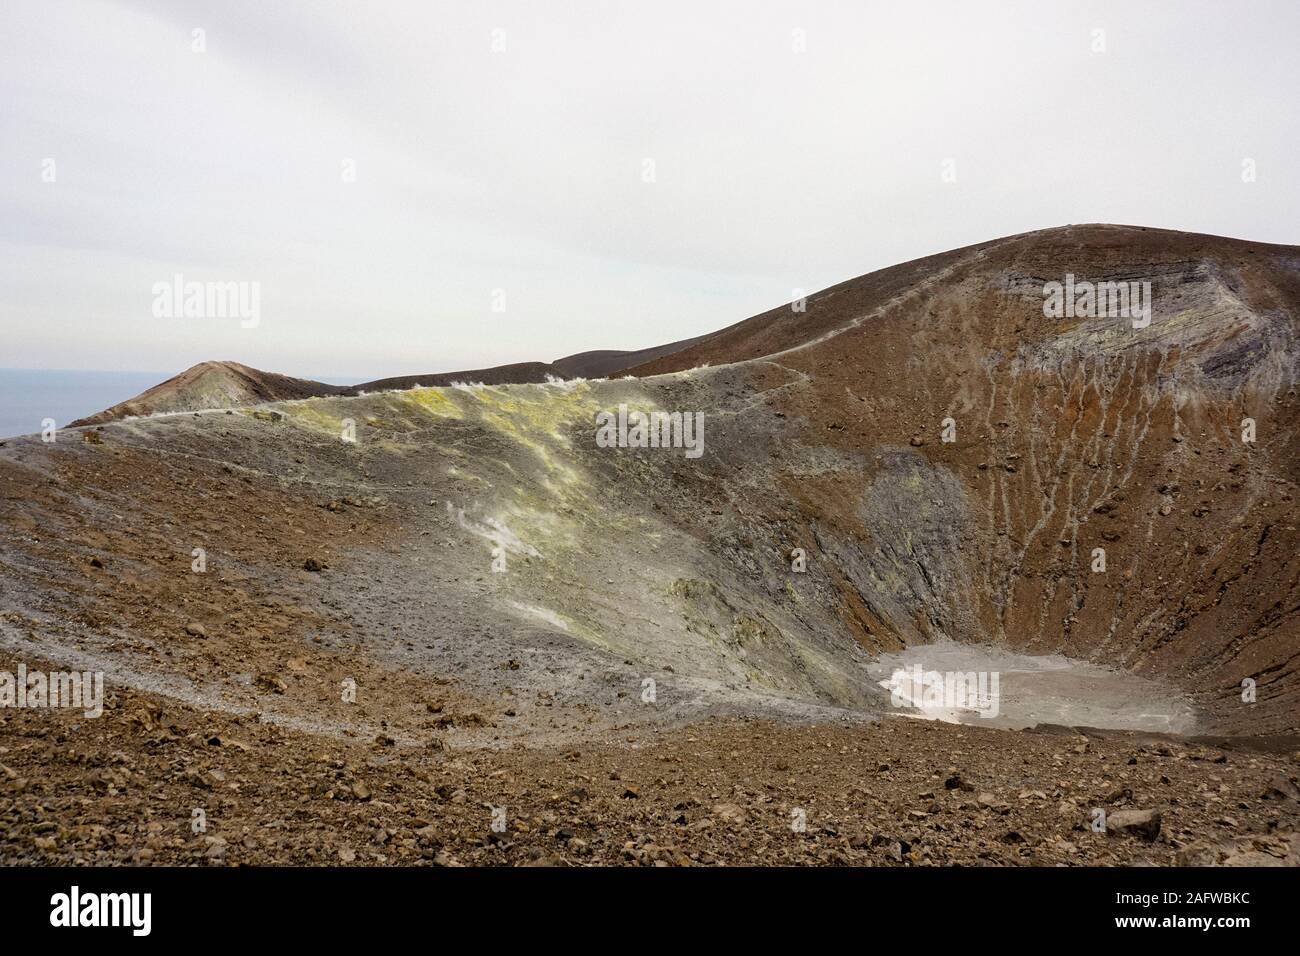 Crater view, Gran Cratere, Vulcano, Sicily, Italy Stock Photo